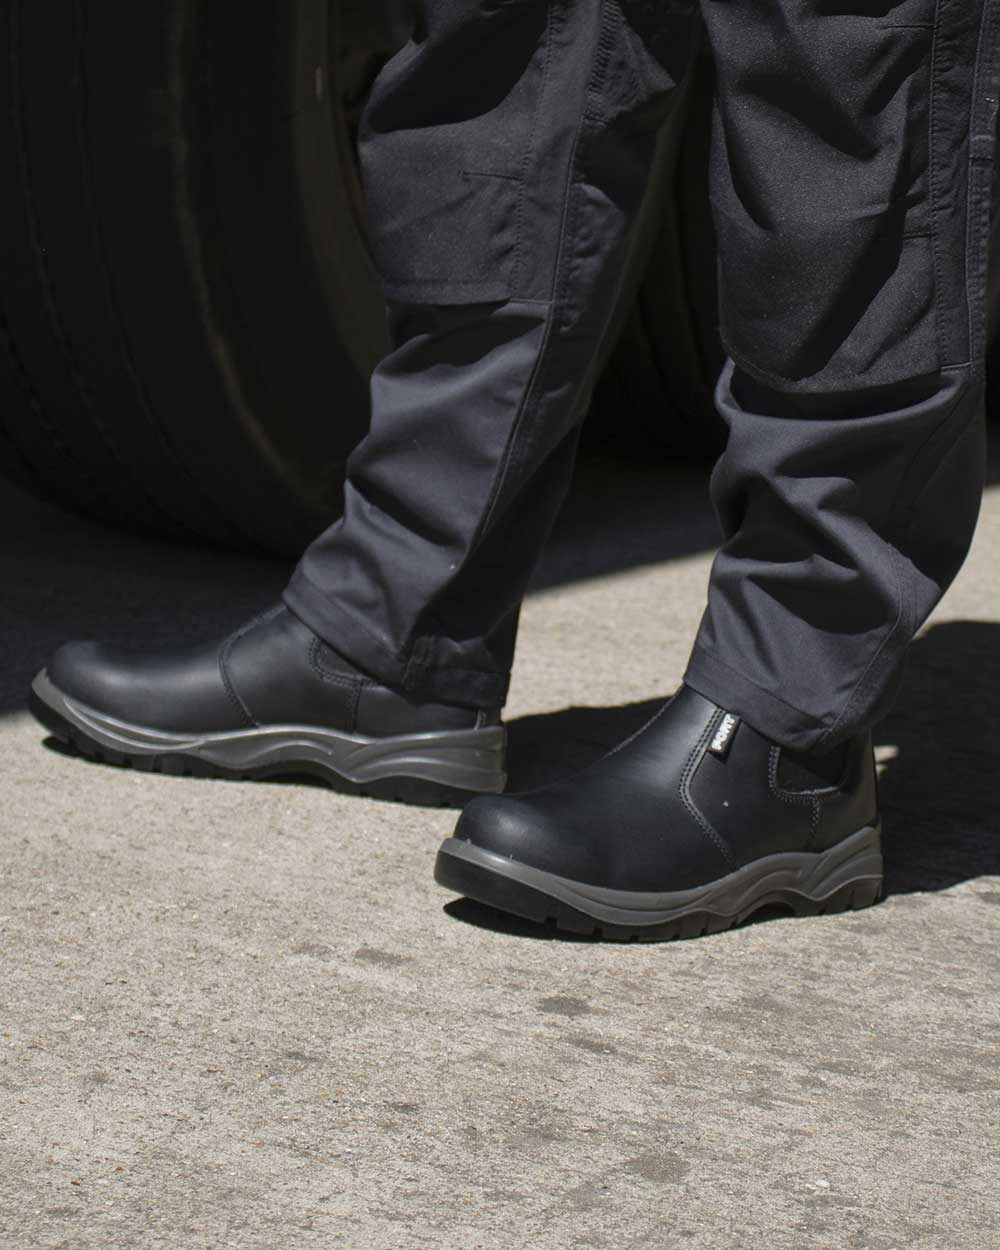 Black Coloured Fort Nelson Safety Dealer Boots On A Street Background 